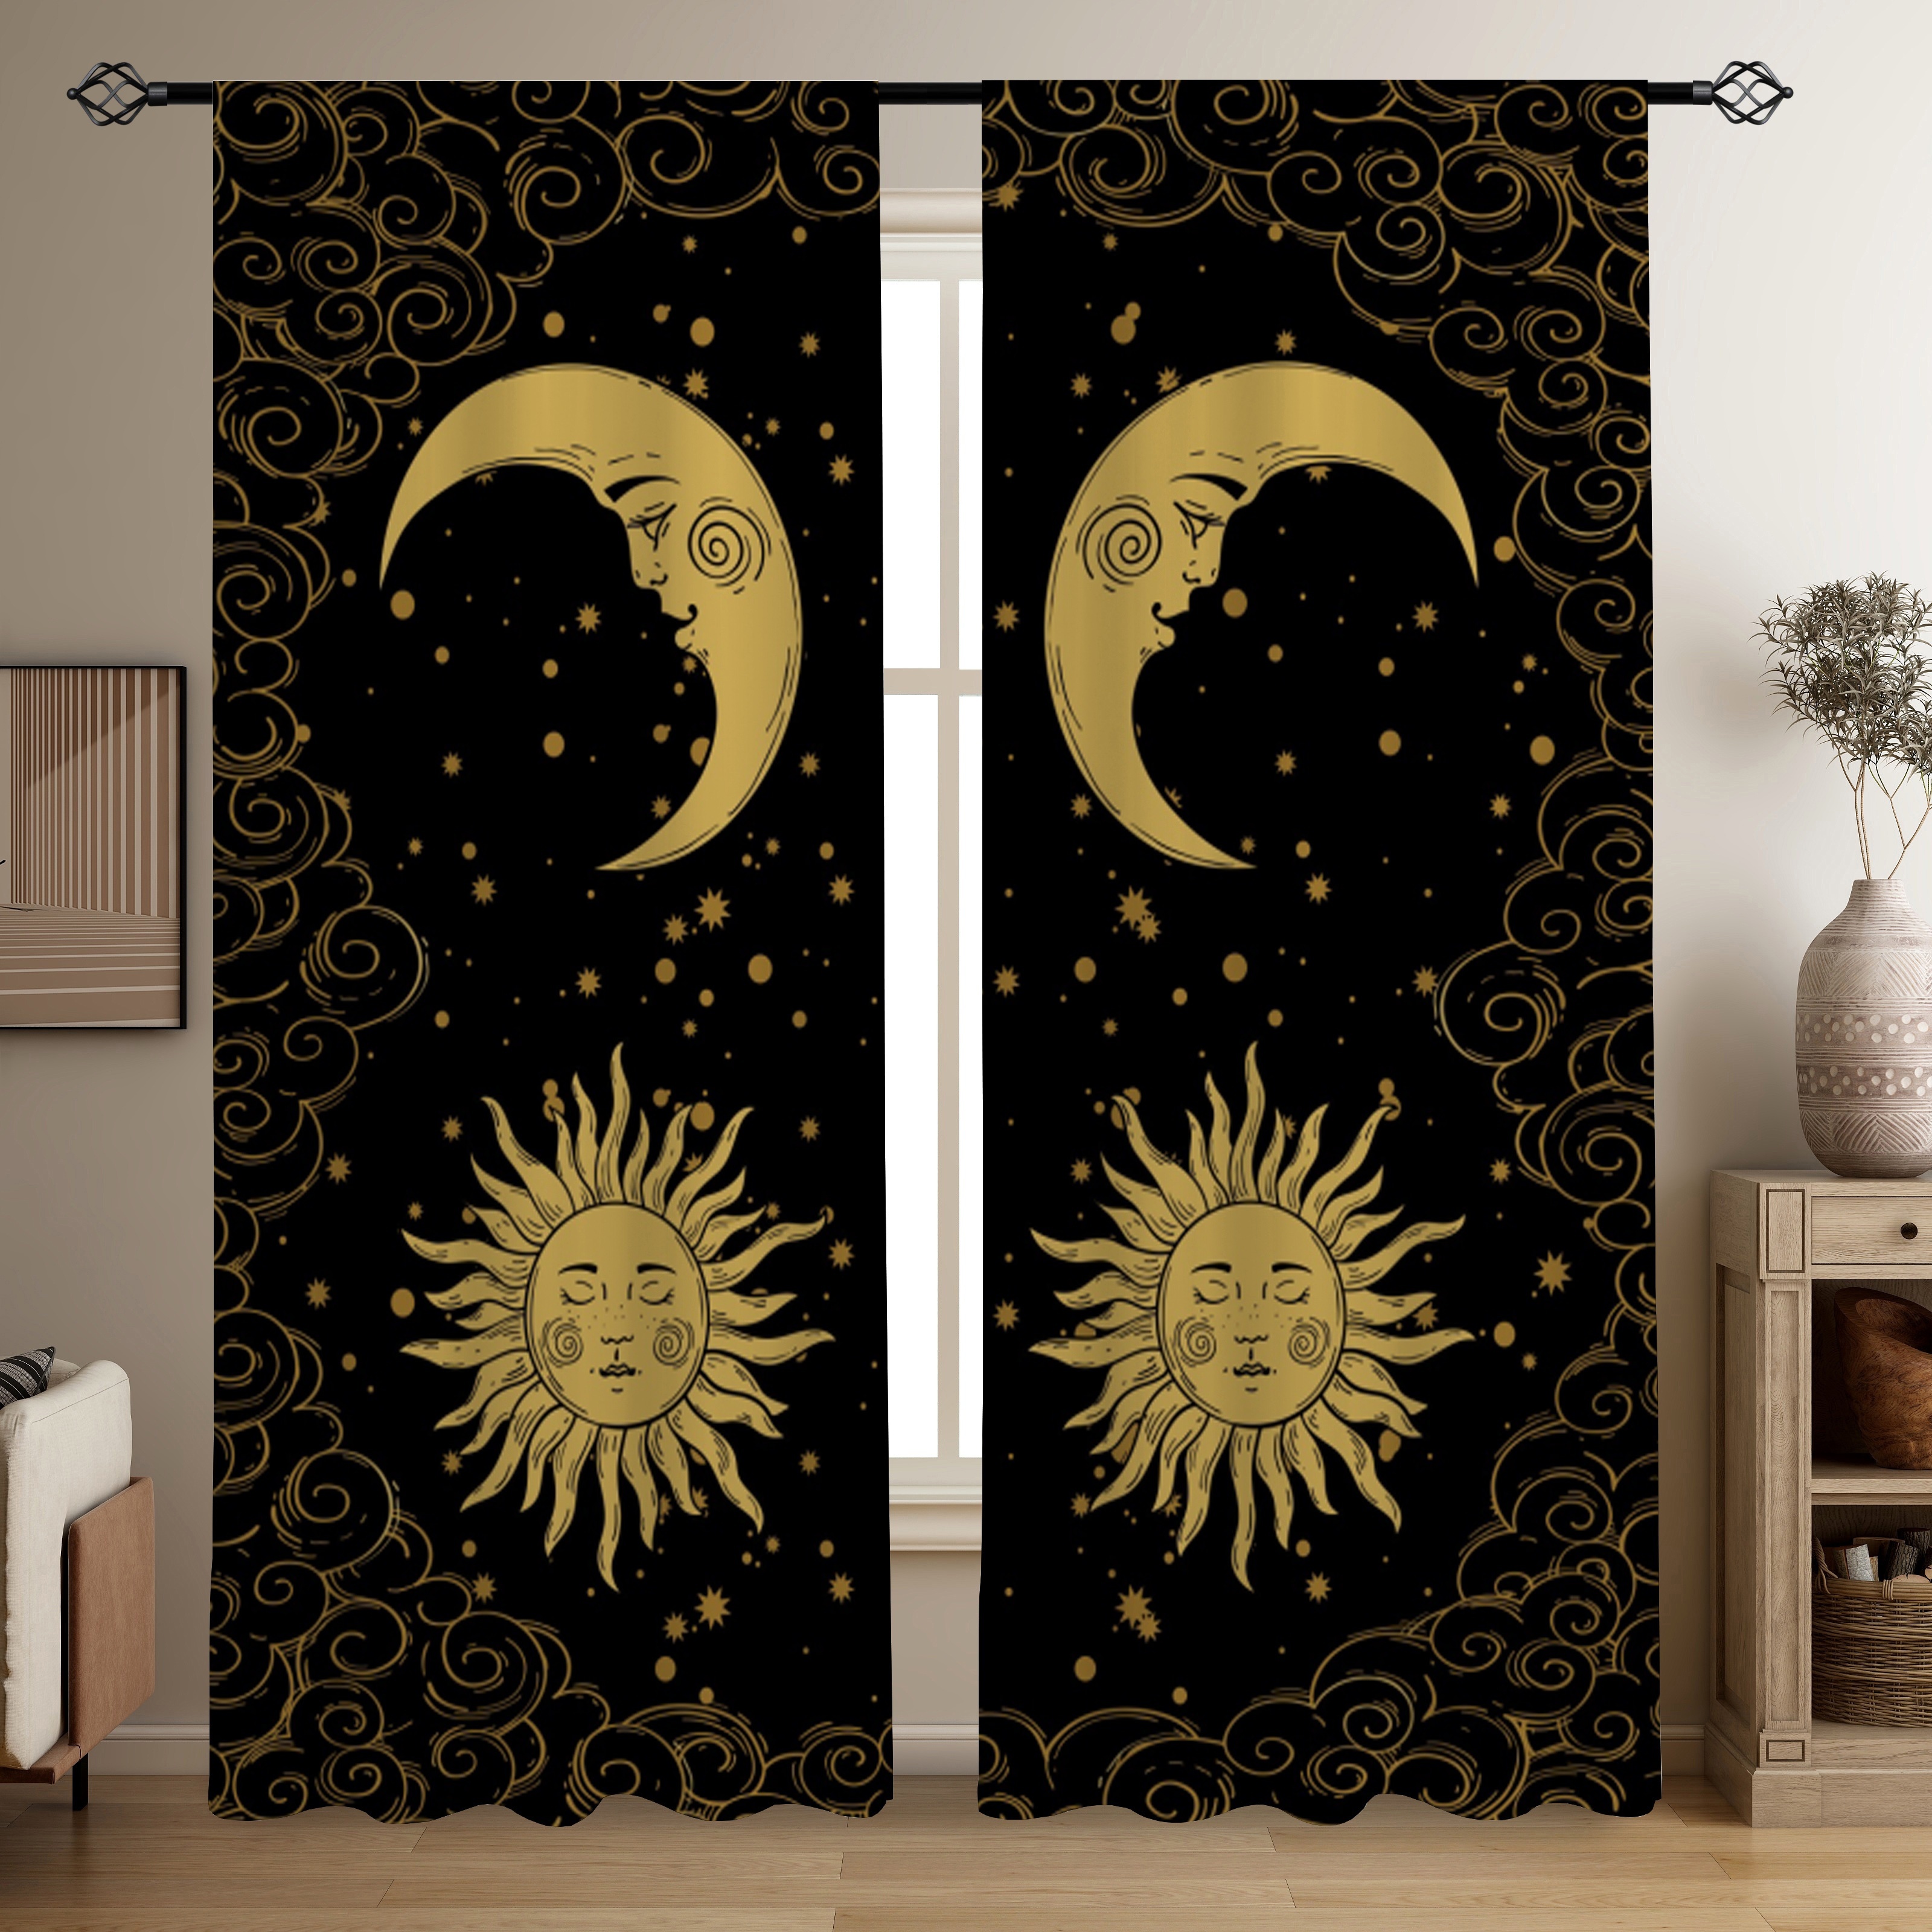 

2pcs, Sun Moon Star Printed Translucent Curtains, Multi-scene Polyester Rod Pocket Decorative Curtains For Living Room Game Room Bedroom Home Decor Party Supplies